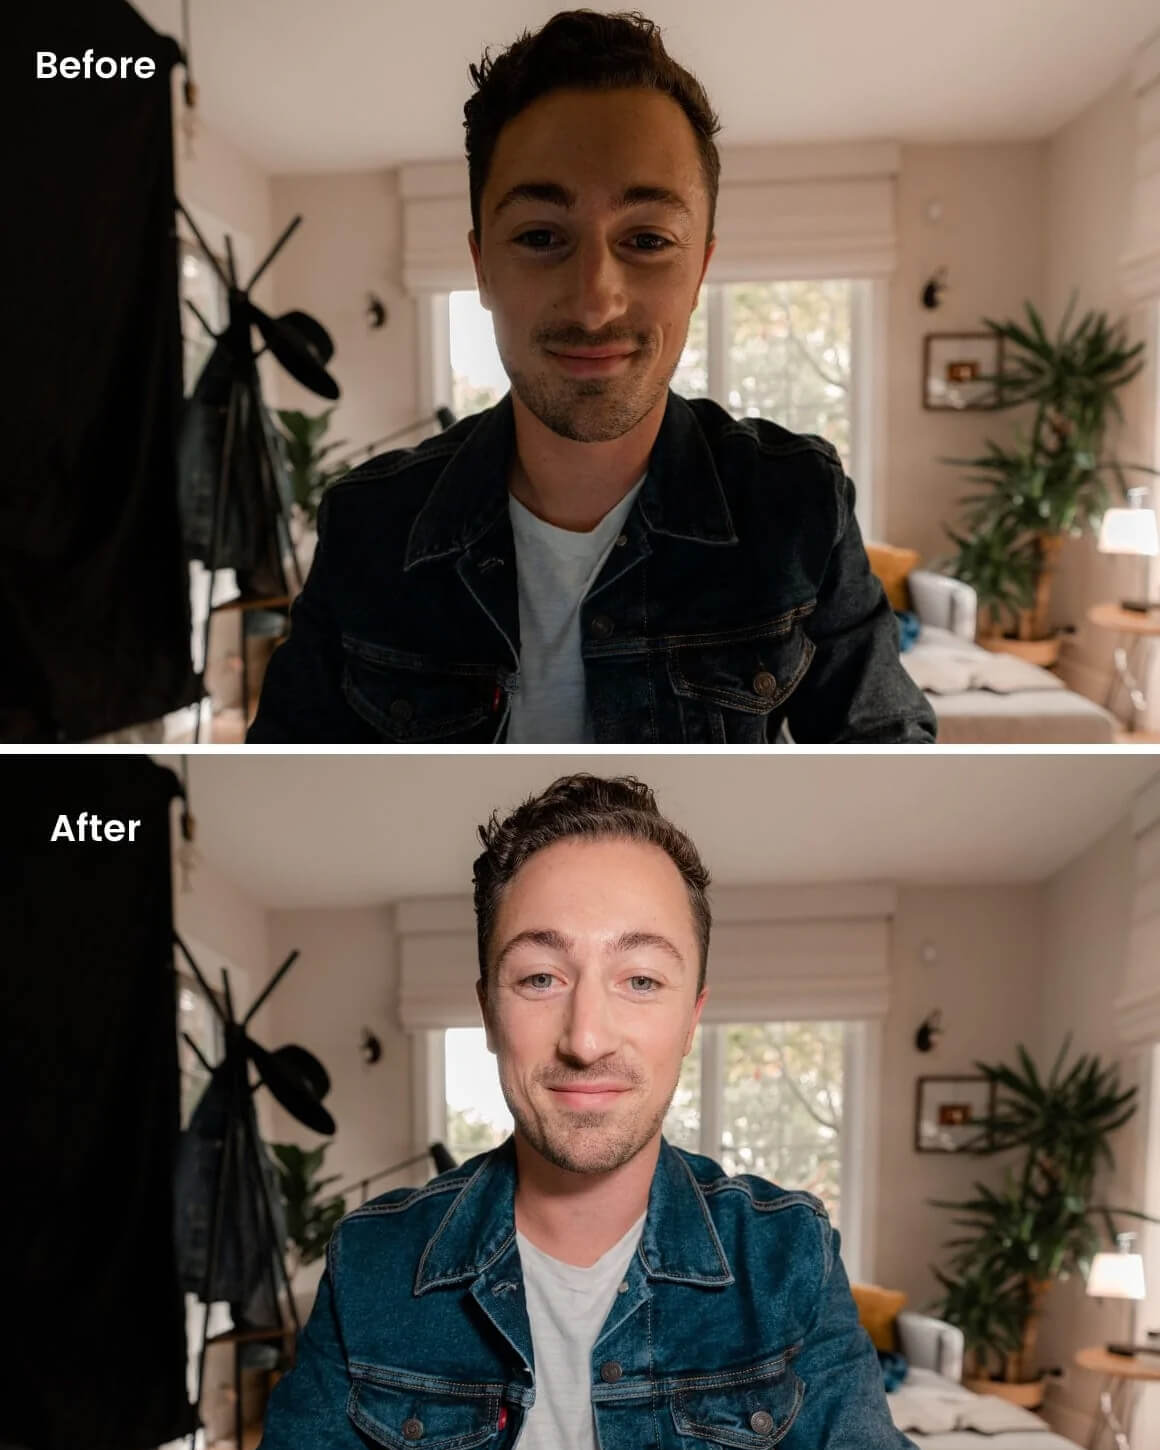 Stacked comparison of man's appearance with and without lighting from Lume Cube's Broadcast Lighting Kit.